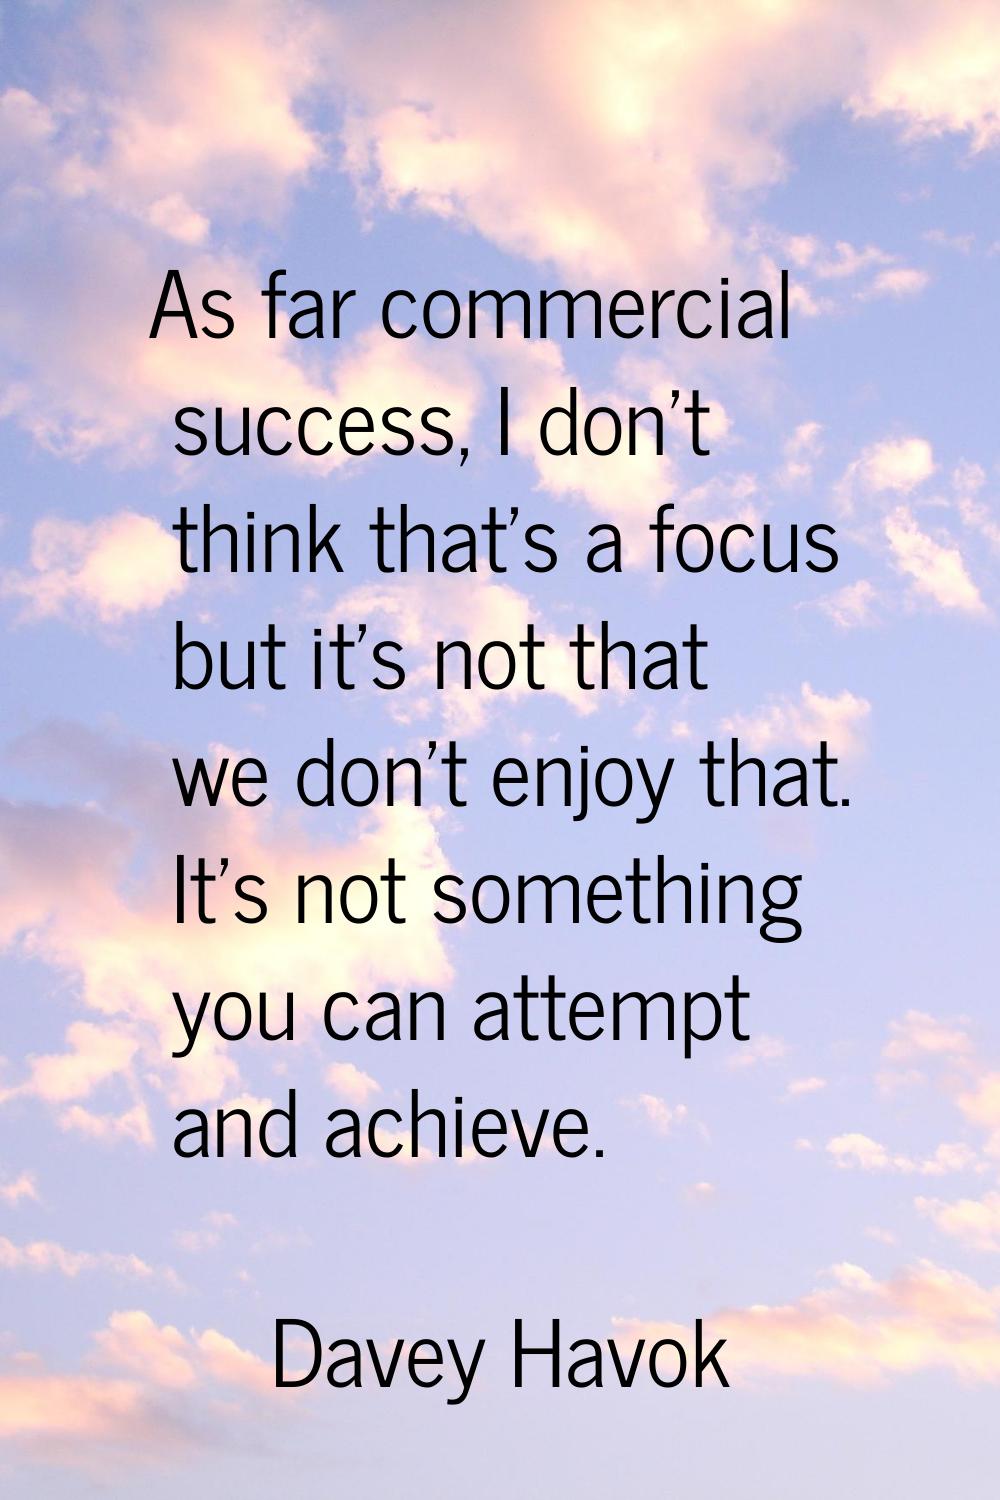 As far commercial success, I don't think that's a focus but it's not that we don't enjoy that. It's